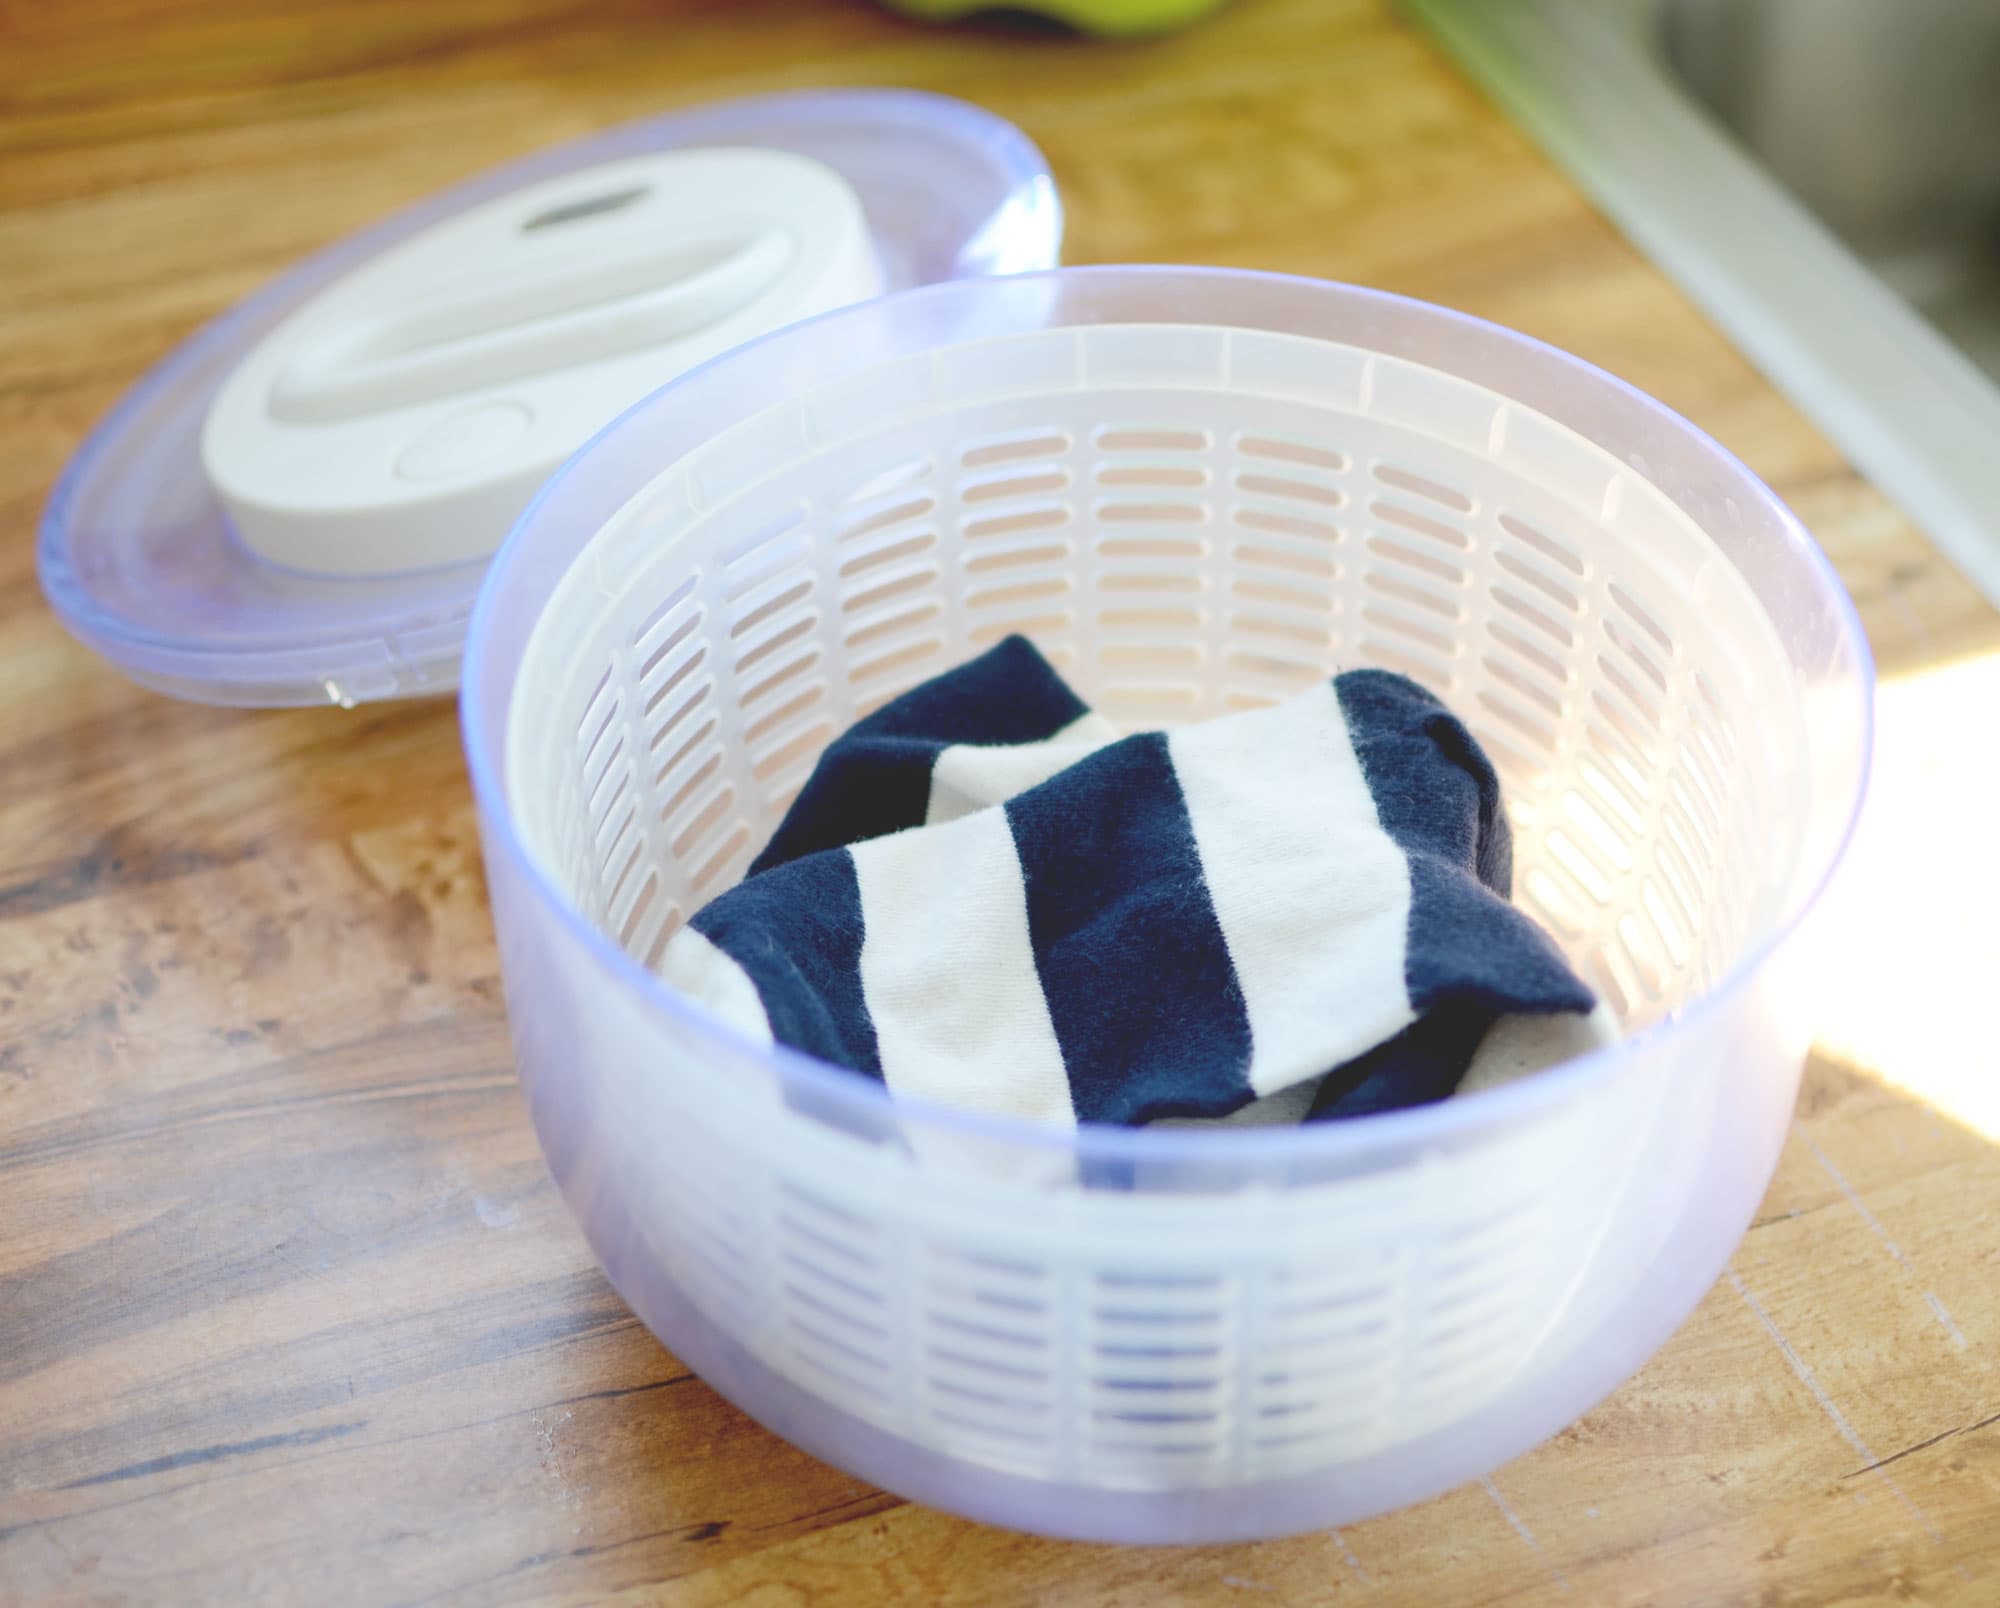 My Top 5 Uses for a Salad Spinner (and It's Not Just for Salad!) -  RunAwayRice